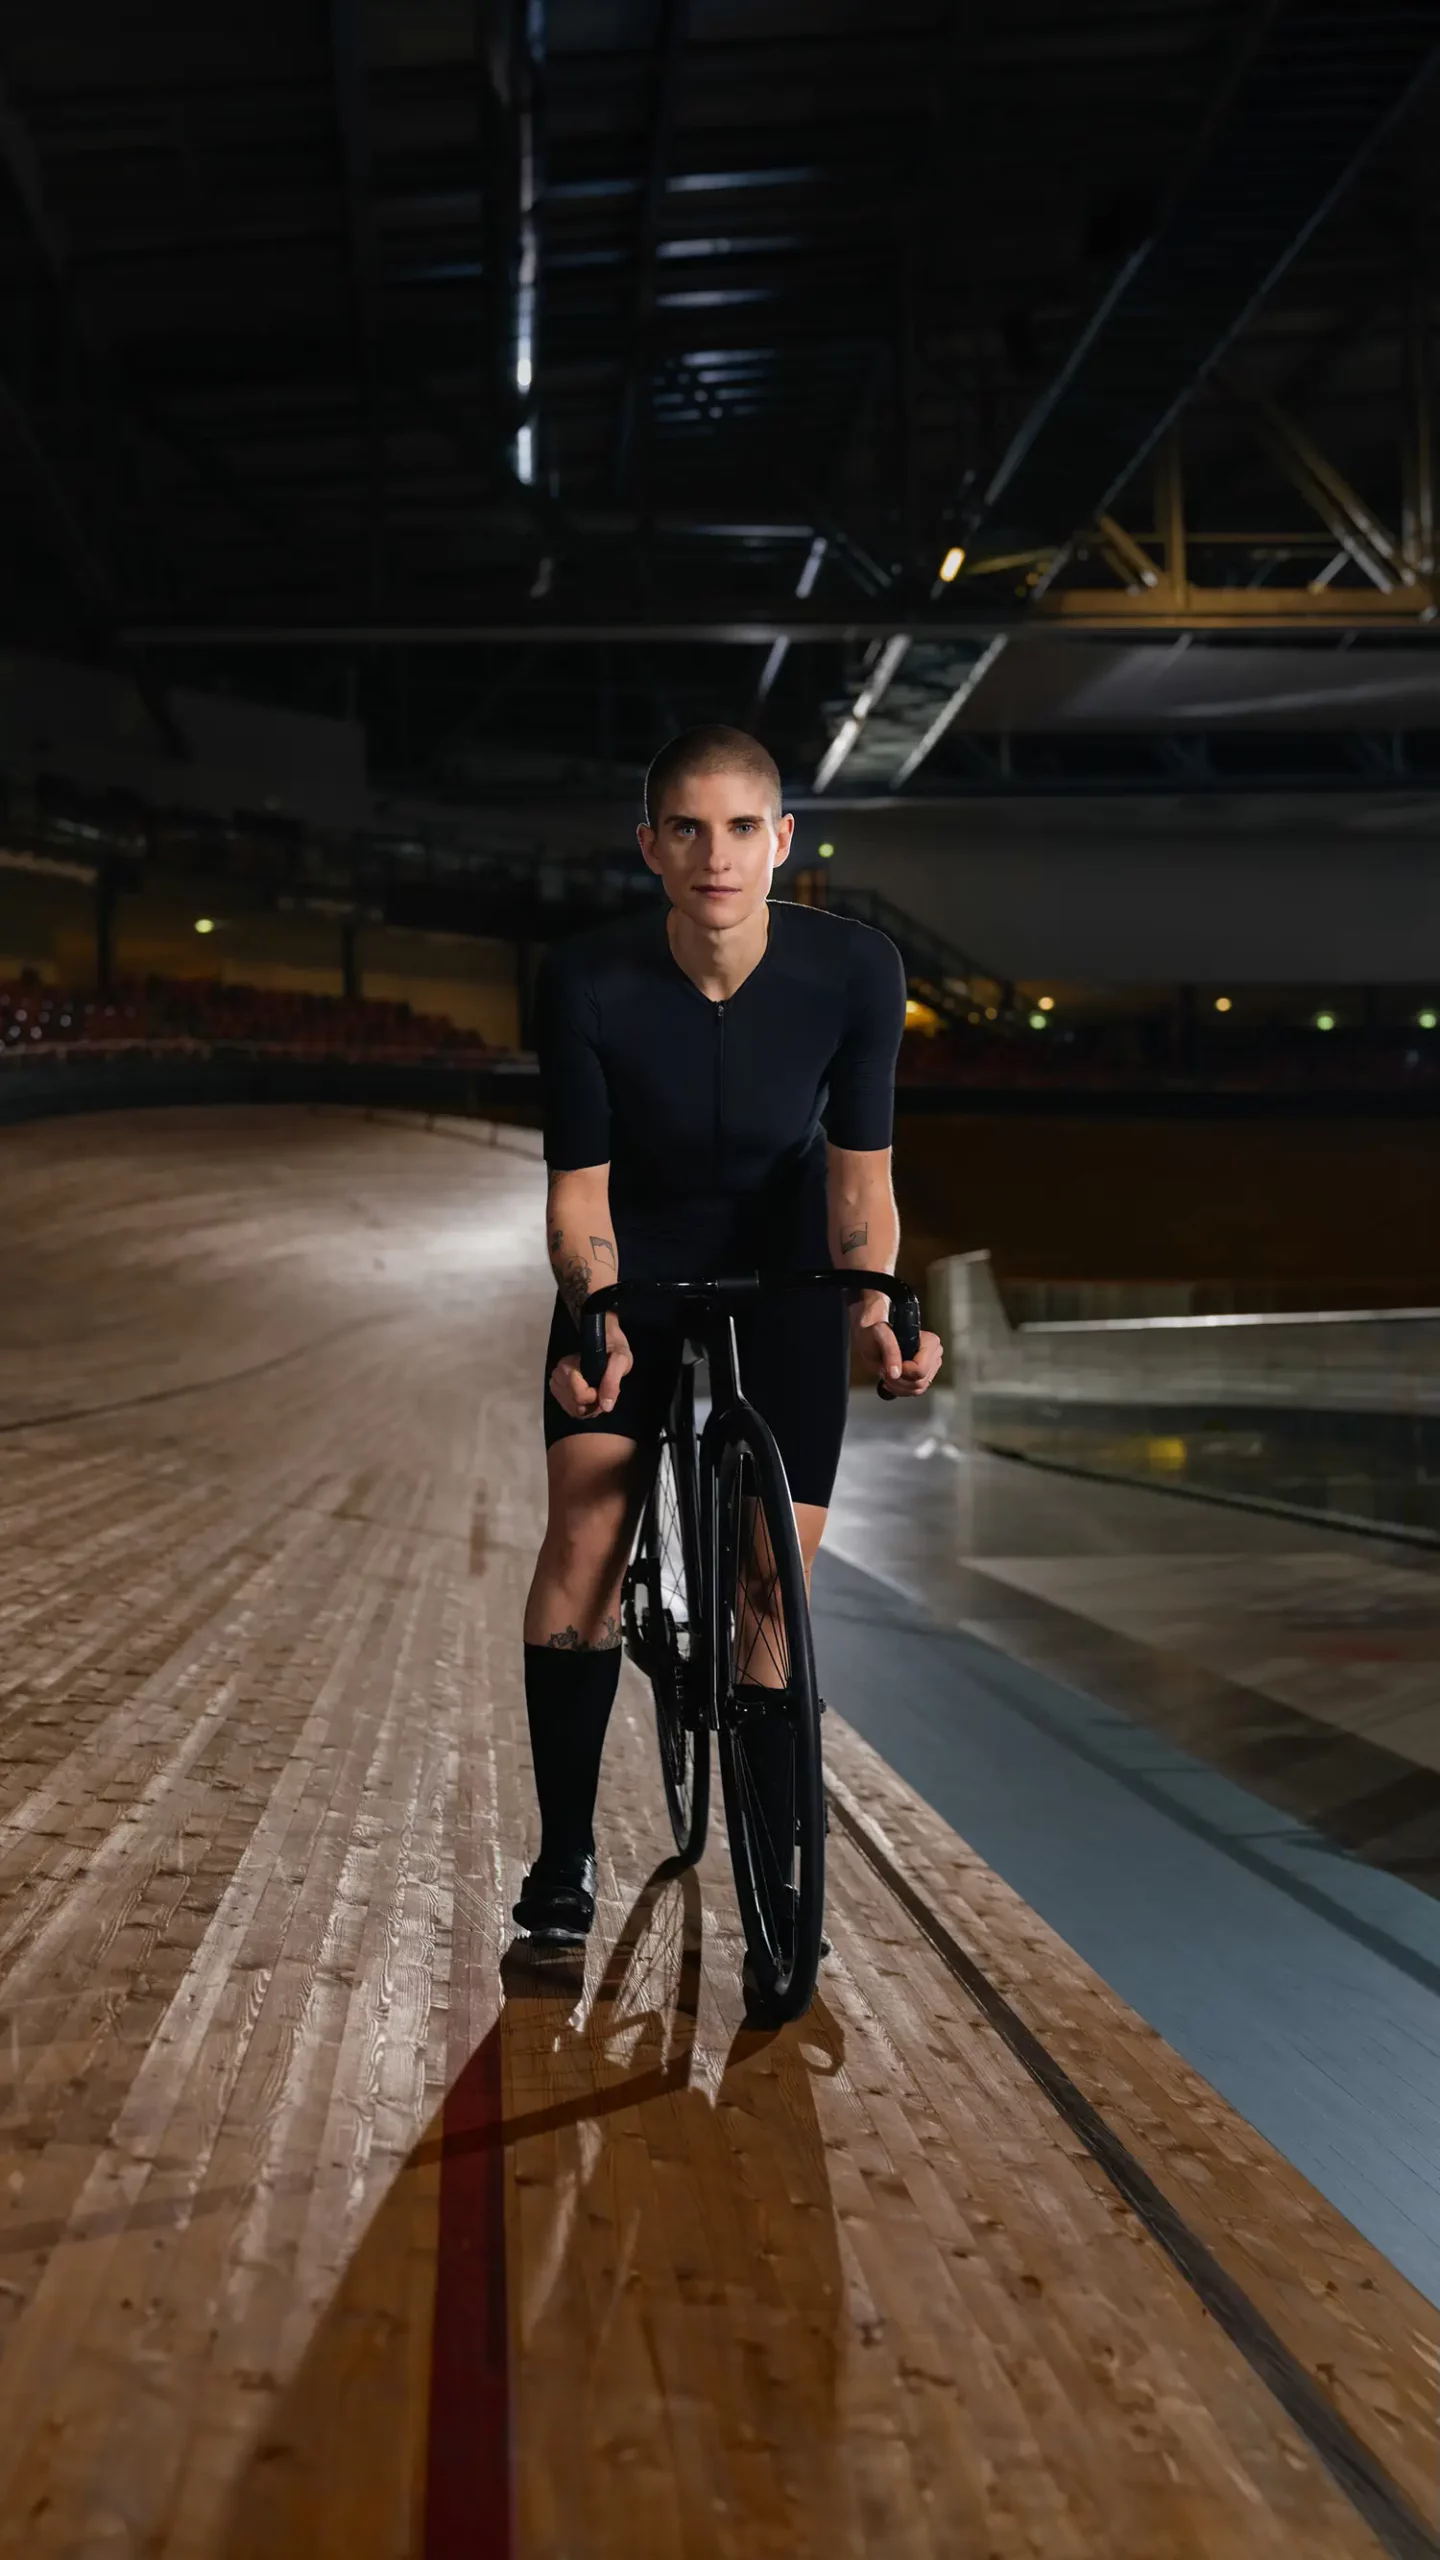 Dior's brand ambassador and LVMH's newest sponsored athlete: Paralympic cyclist Marie Patouillet